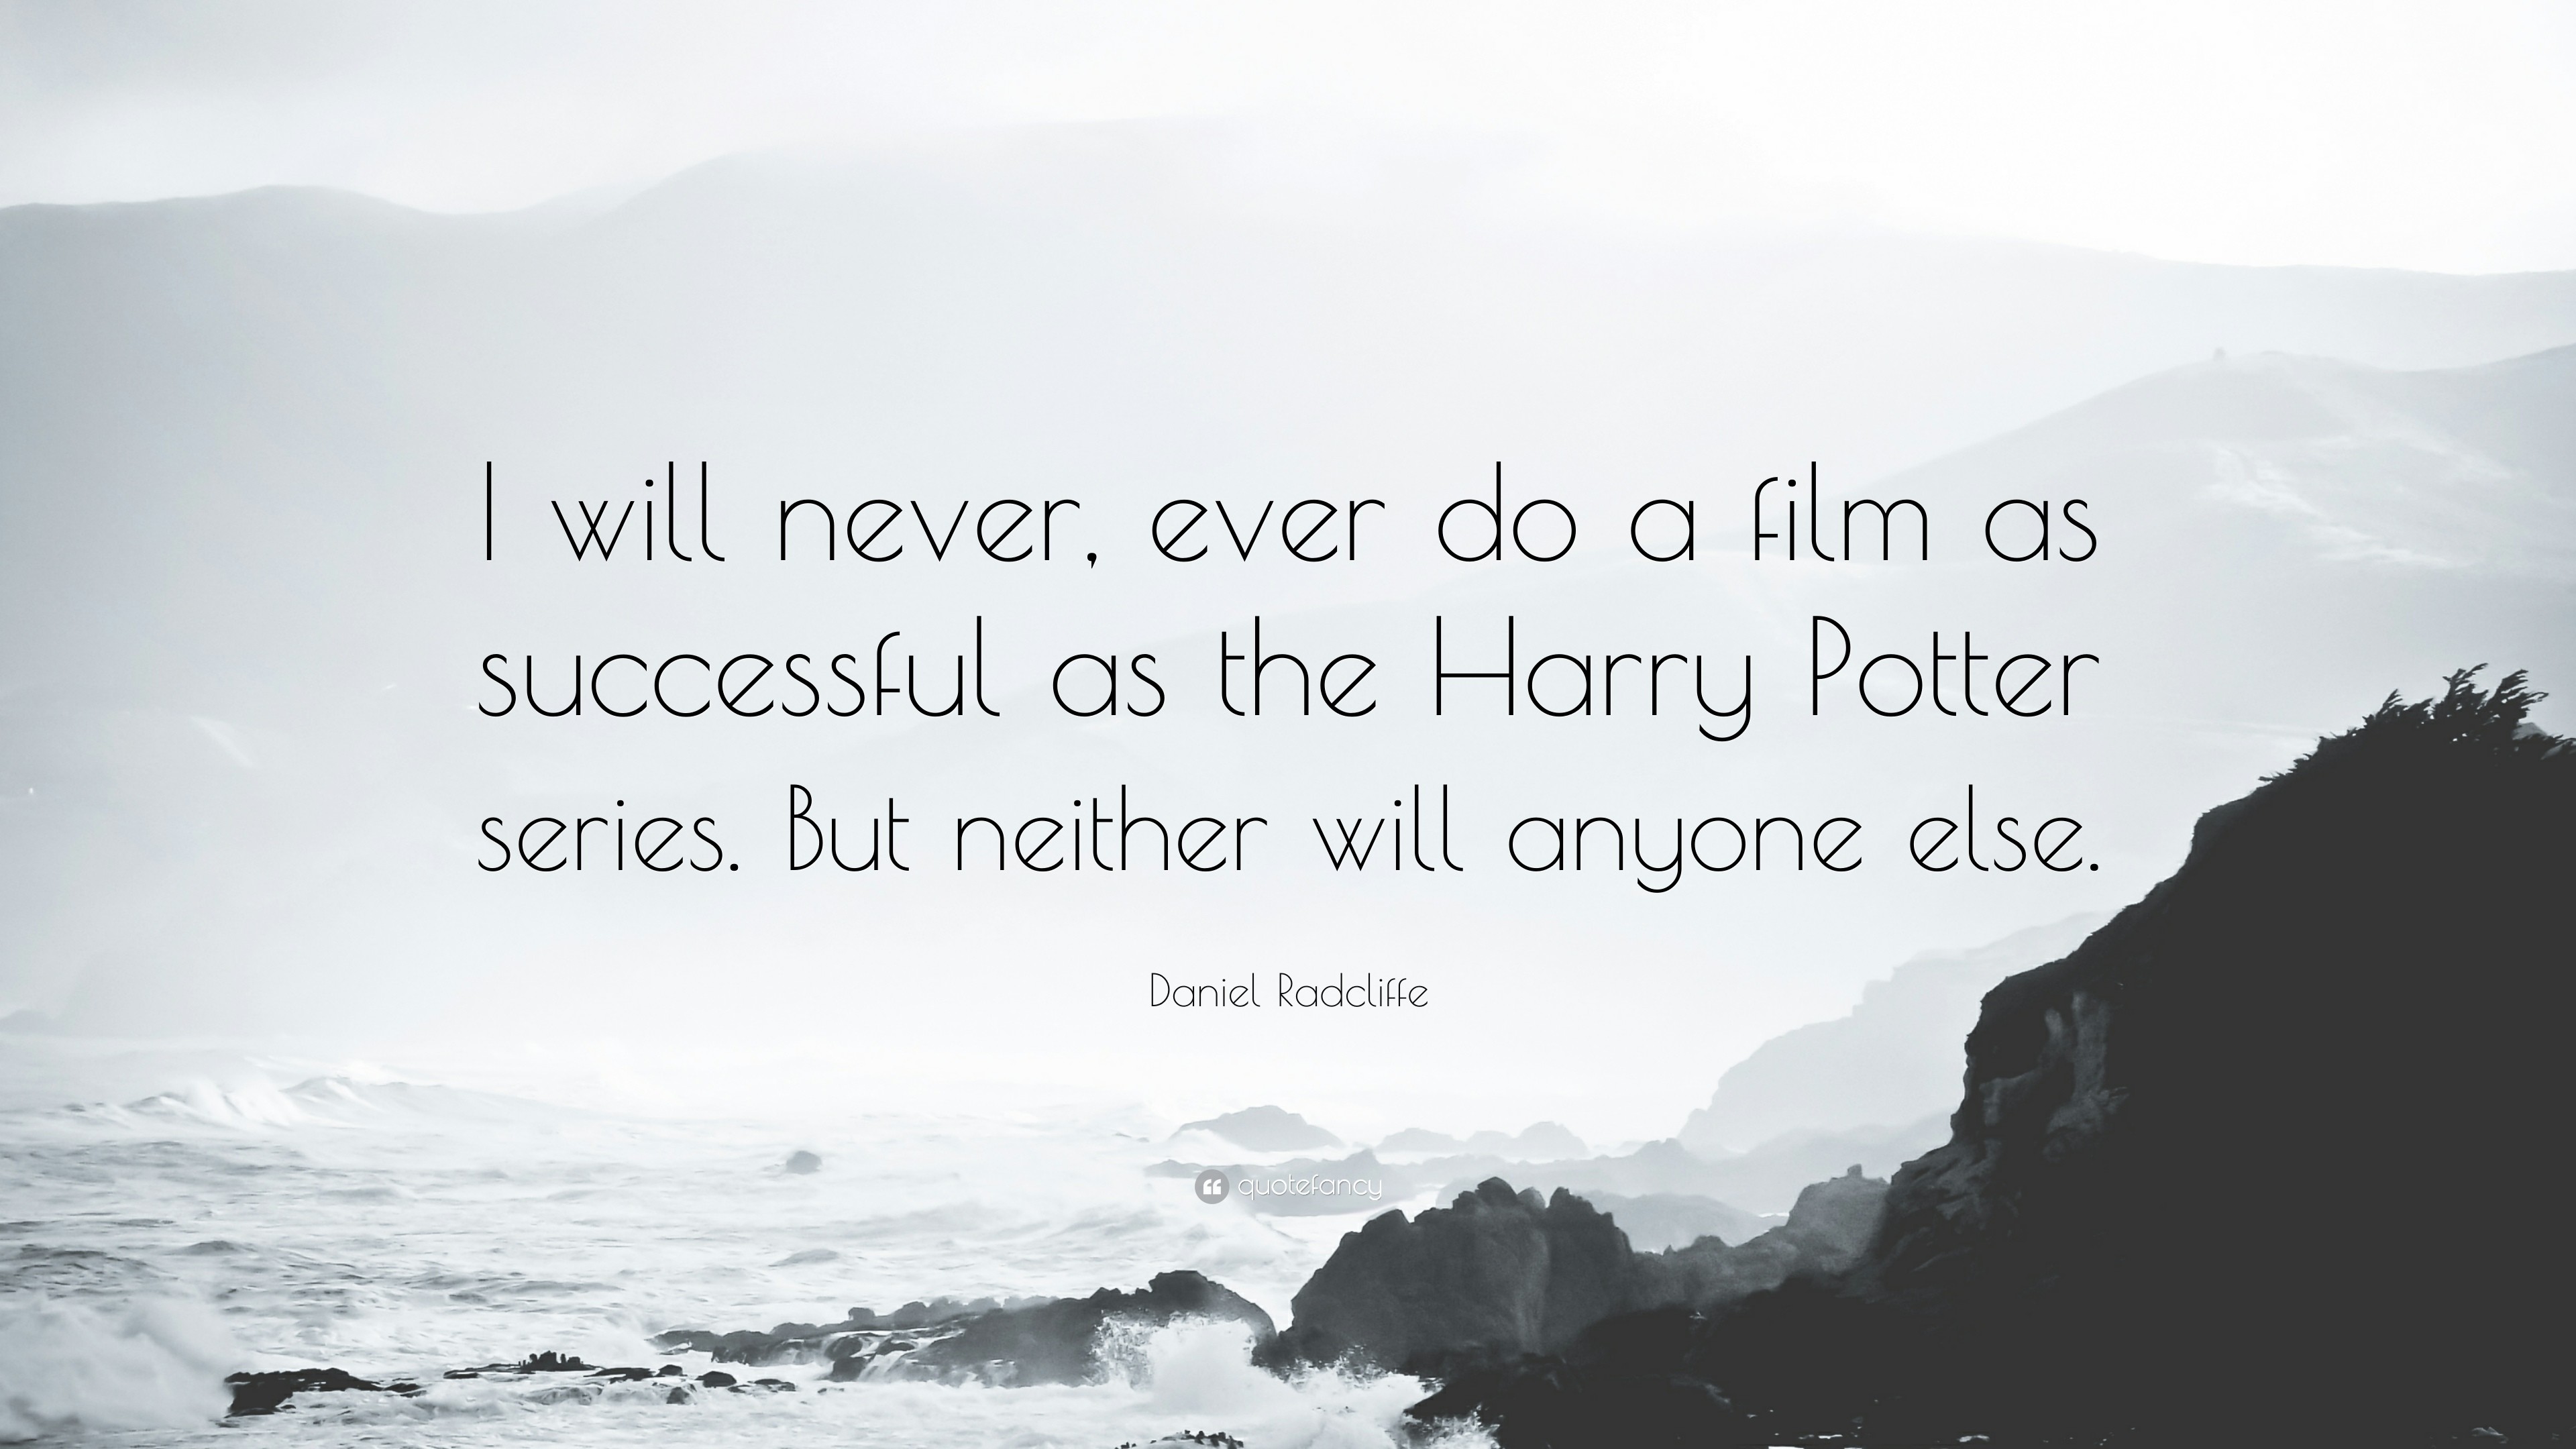 59 Harry Potter Quote